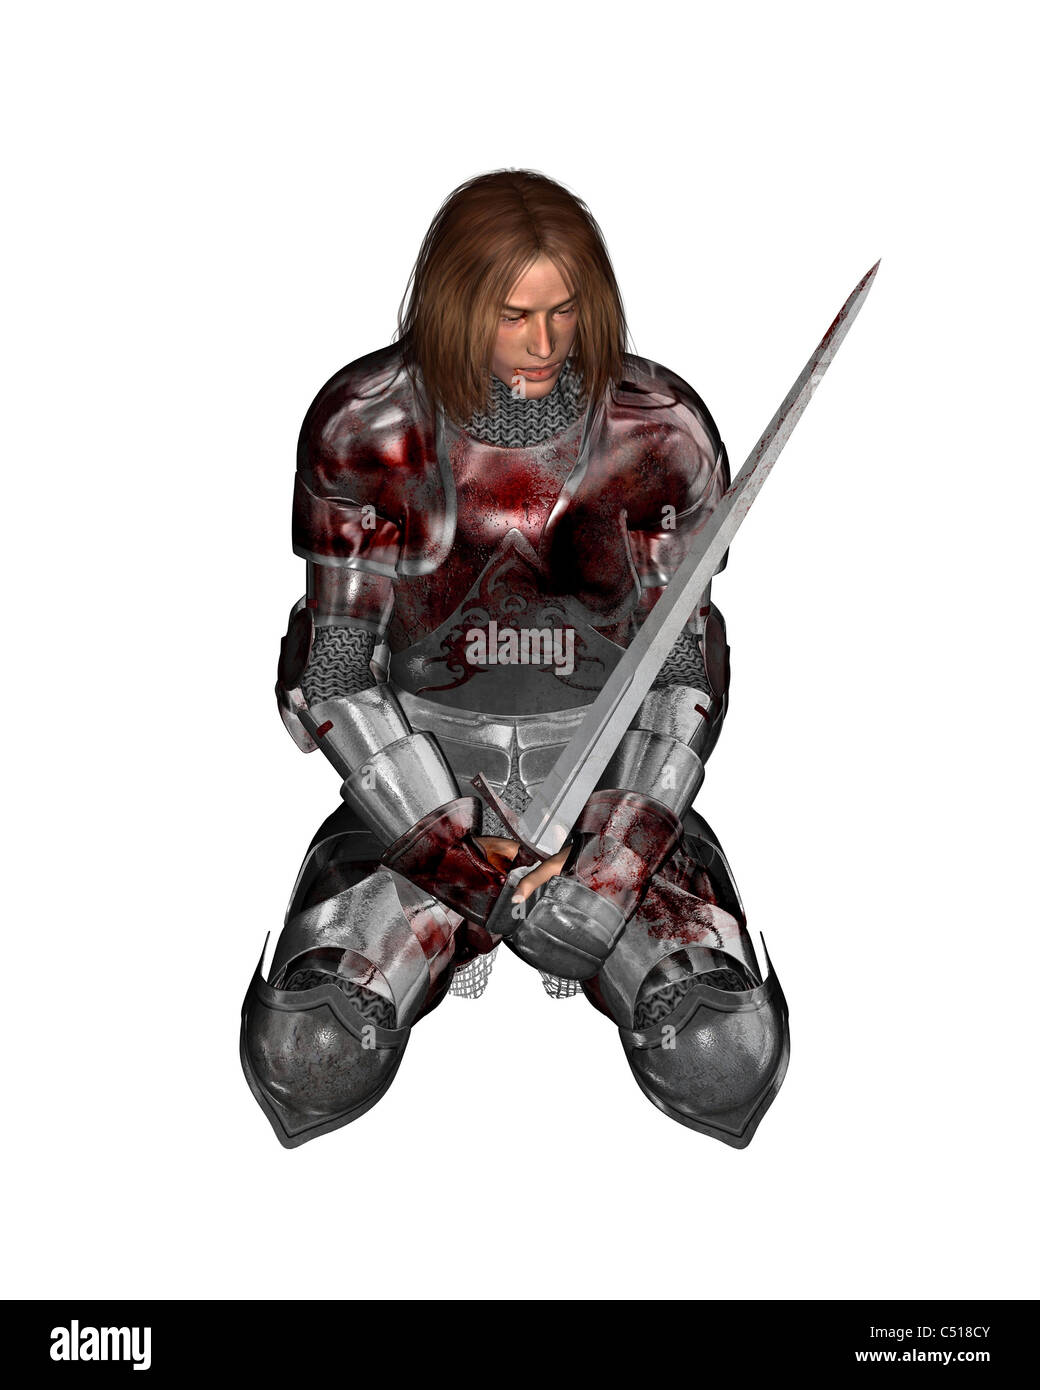 Wounded Knight - 1 Stock Photo